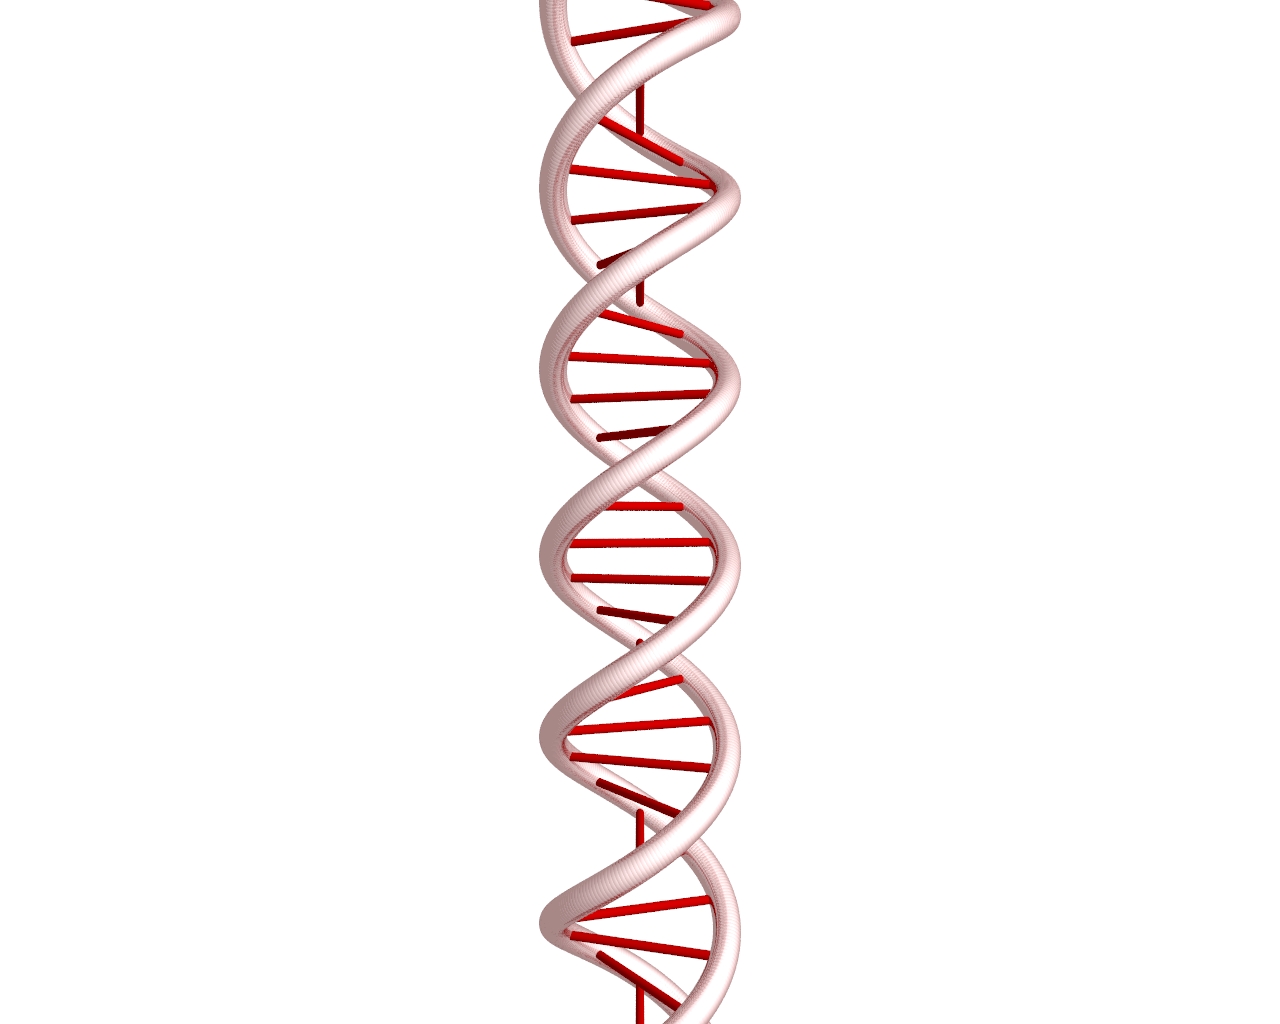 Dna Double Helix Wallpaper images 1280x1024